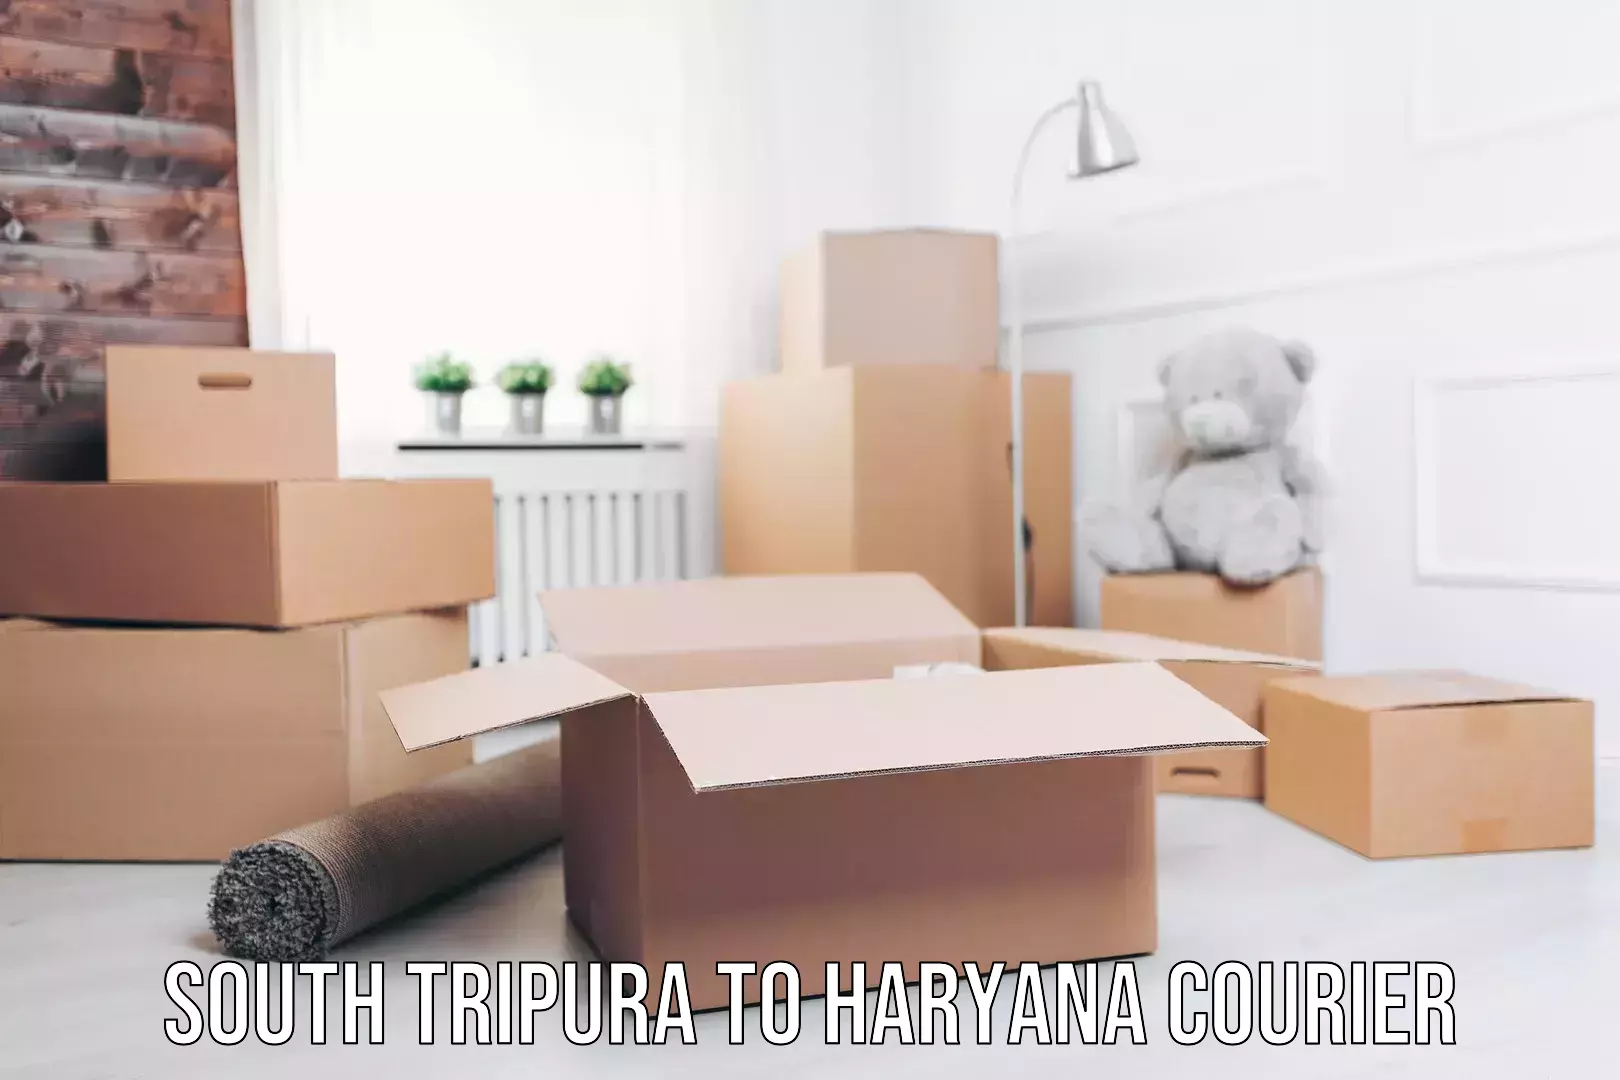 End-to-end delivery South Tripura to Haryana